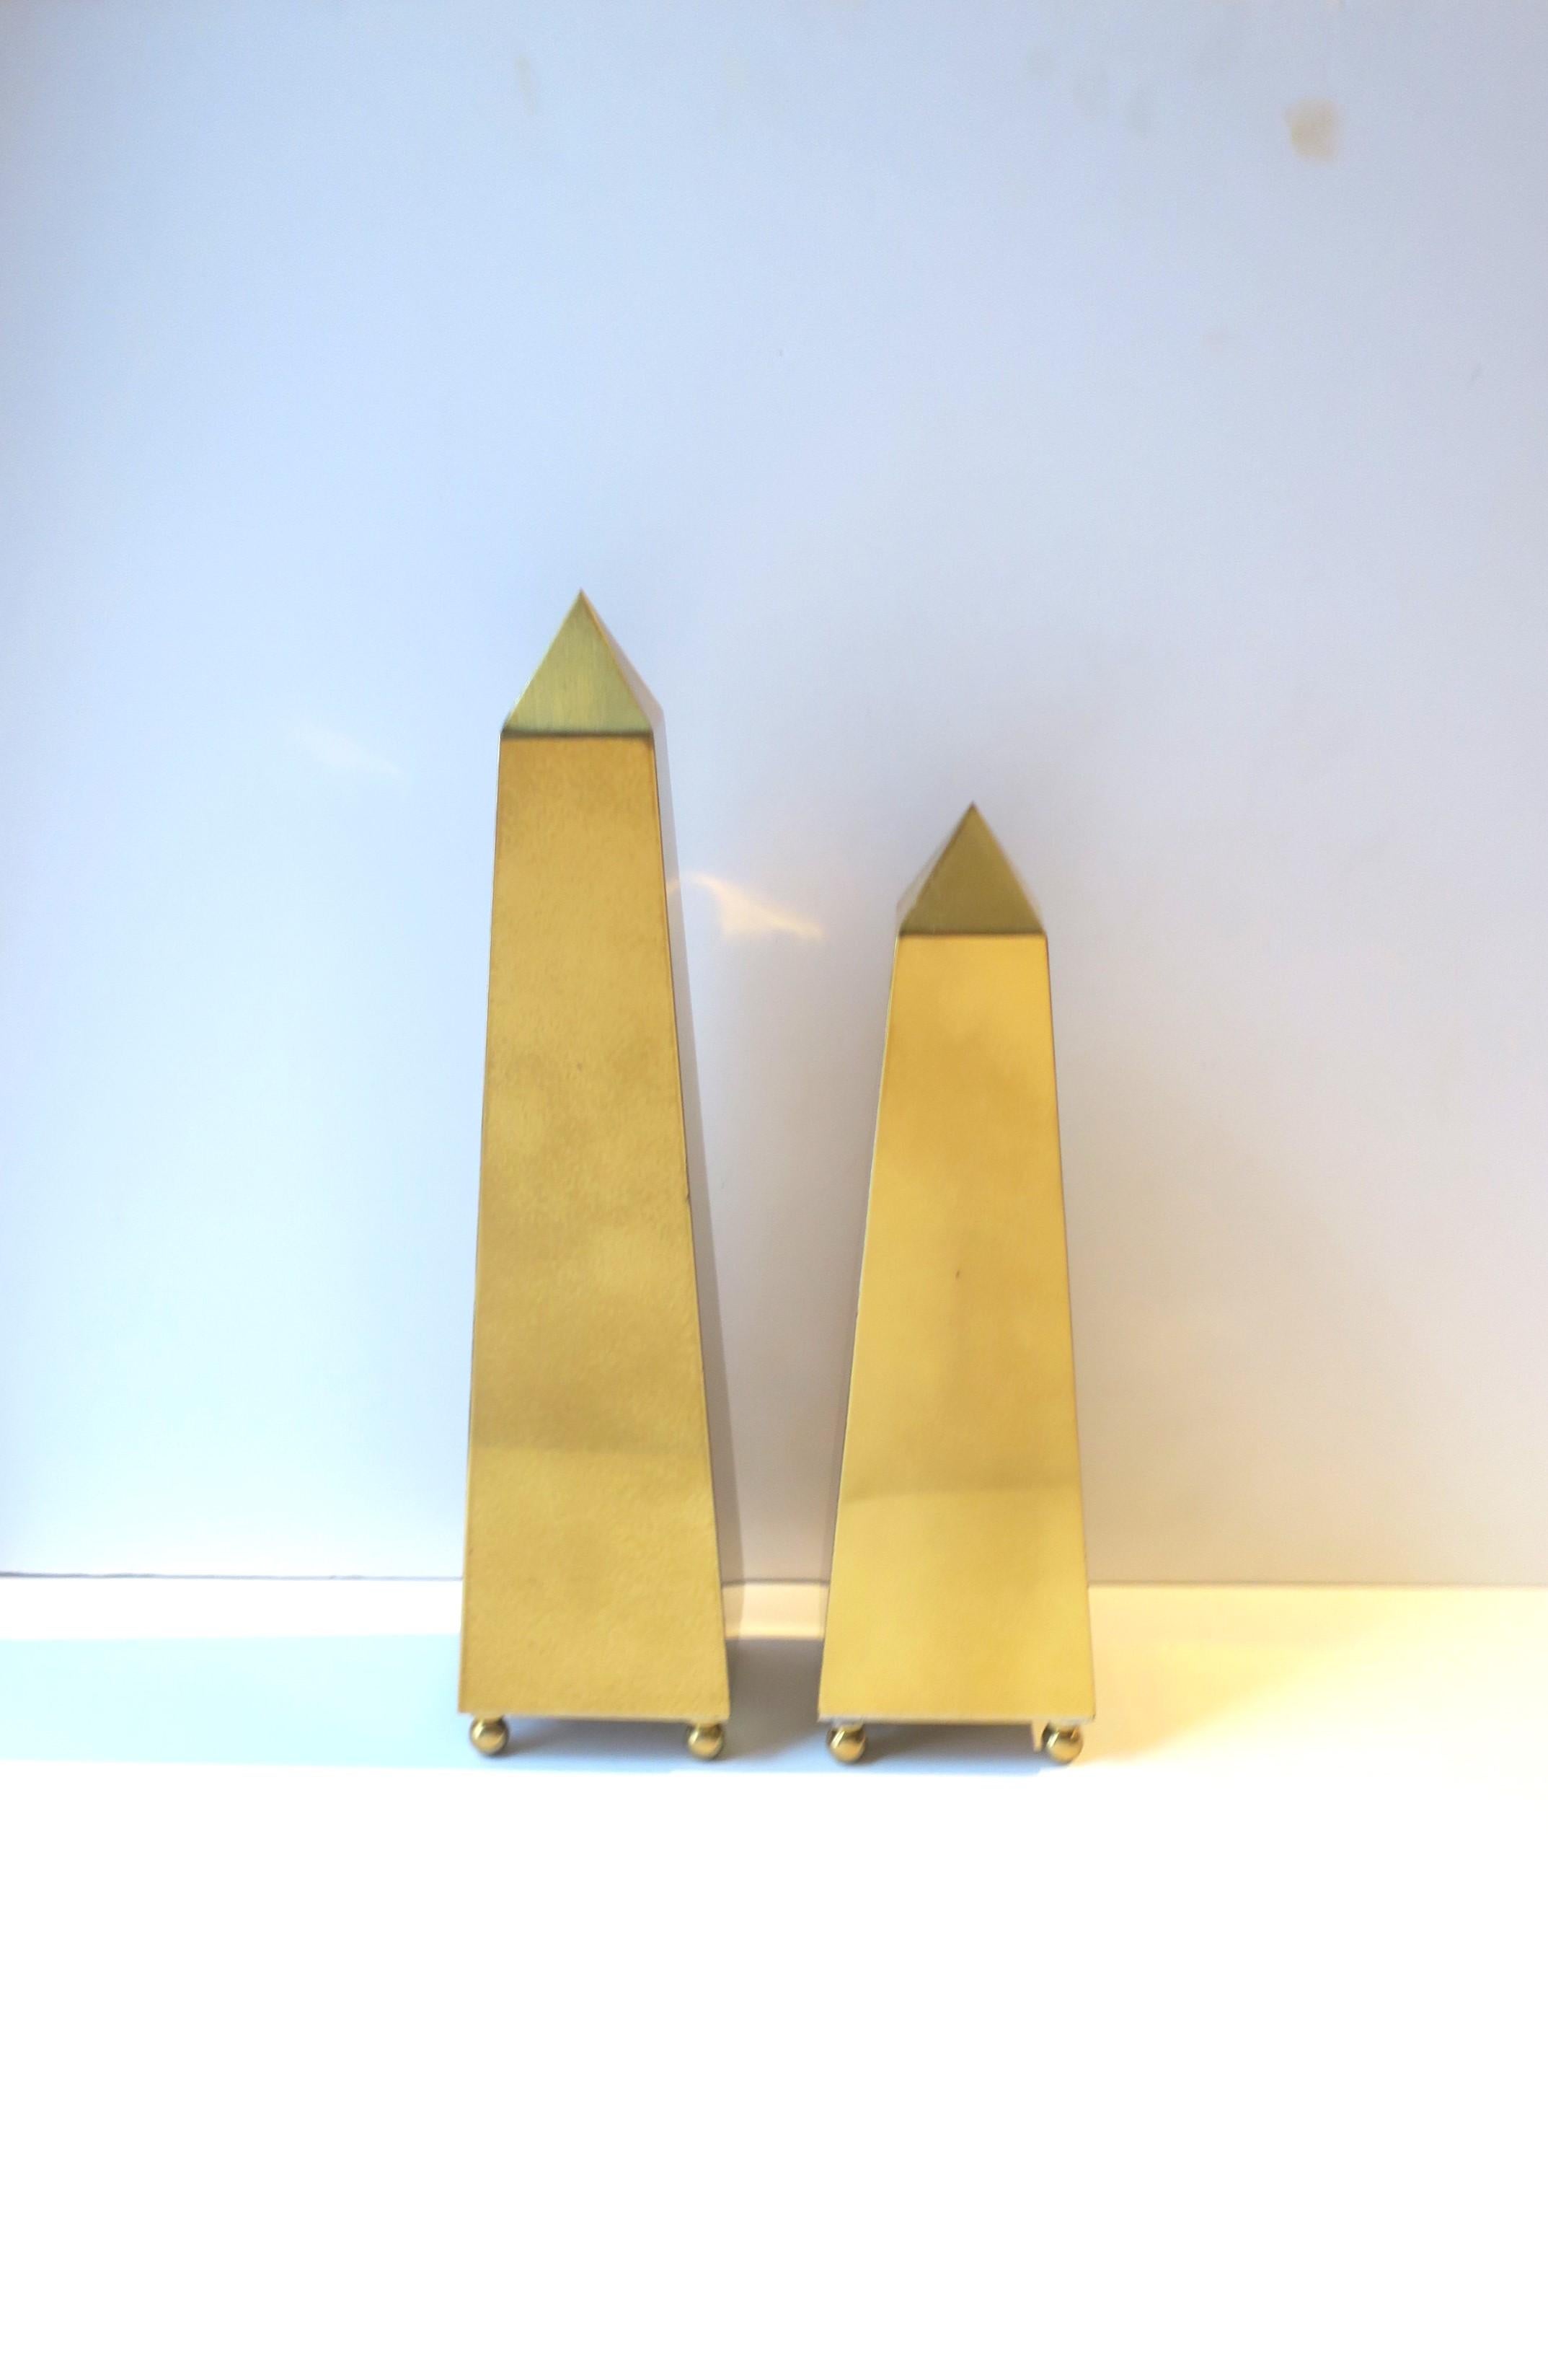 A pair/set of brass Obelisks with ball feet, in the Modern style, circa late 20th century. Pair have a clear lacquer overlay; brass will maintain its shine. A great set of decorative objects for a mantle, credenza, cocktail table, etc. 

Dimensions: